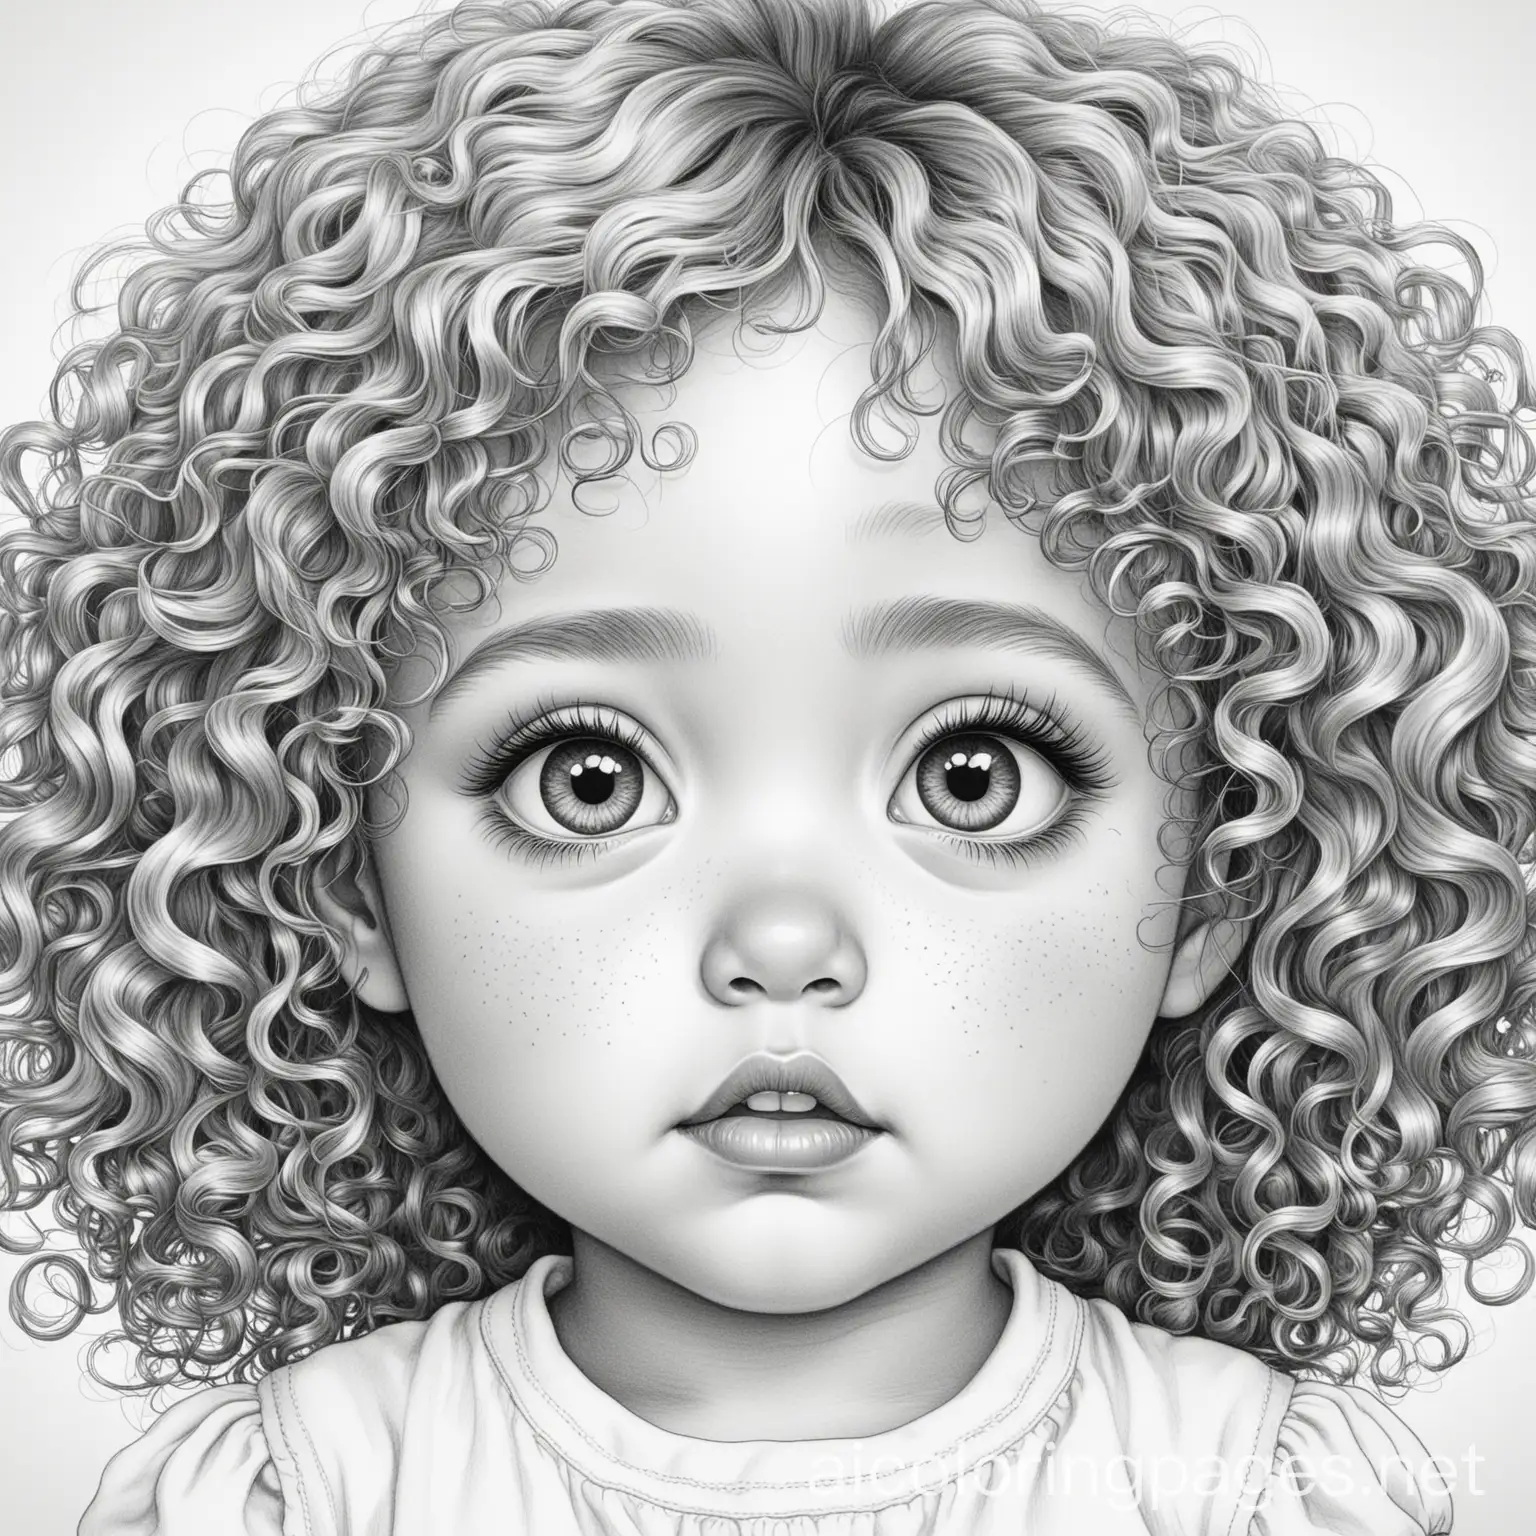 Baby girl with curly hair and big eyes, and a chubby face
, Coloring Page, black and white, line art, white background, Simplicity, Ample White Space. The background of the coloring page is plain white to make it easy for young children to color within the lines. The outlines of all the subjects are easy to distinguish, making it simple for kids to color without too much difficulty